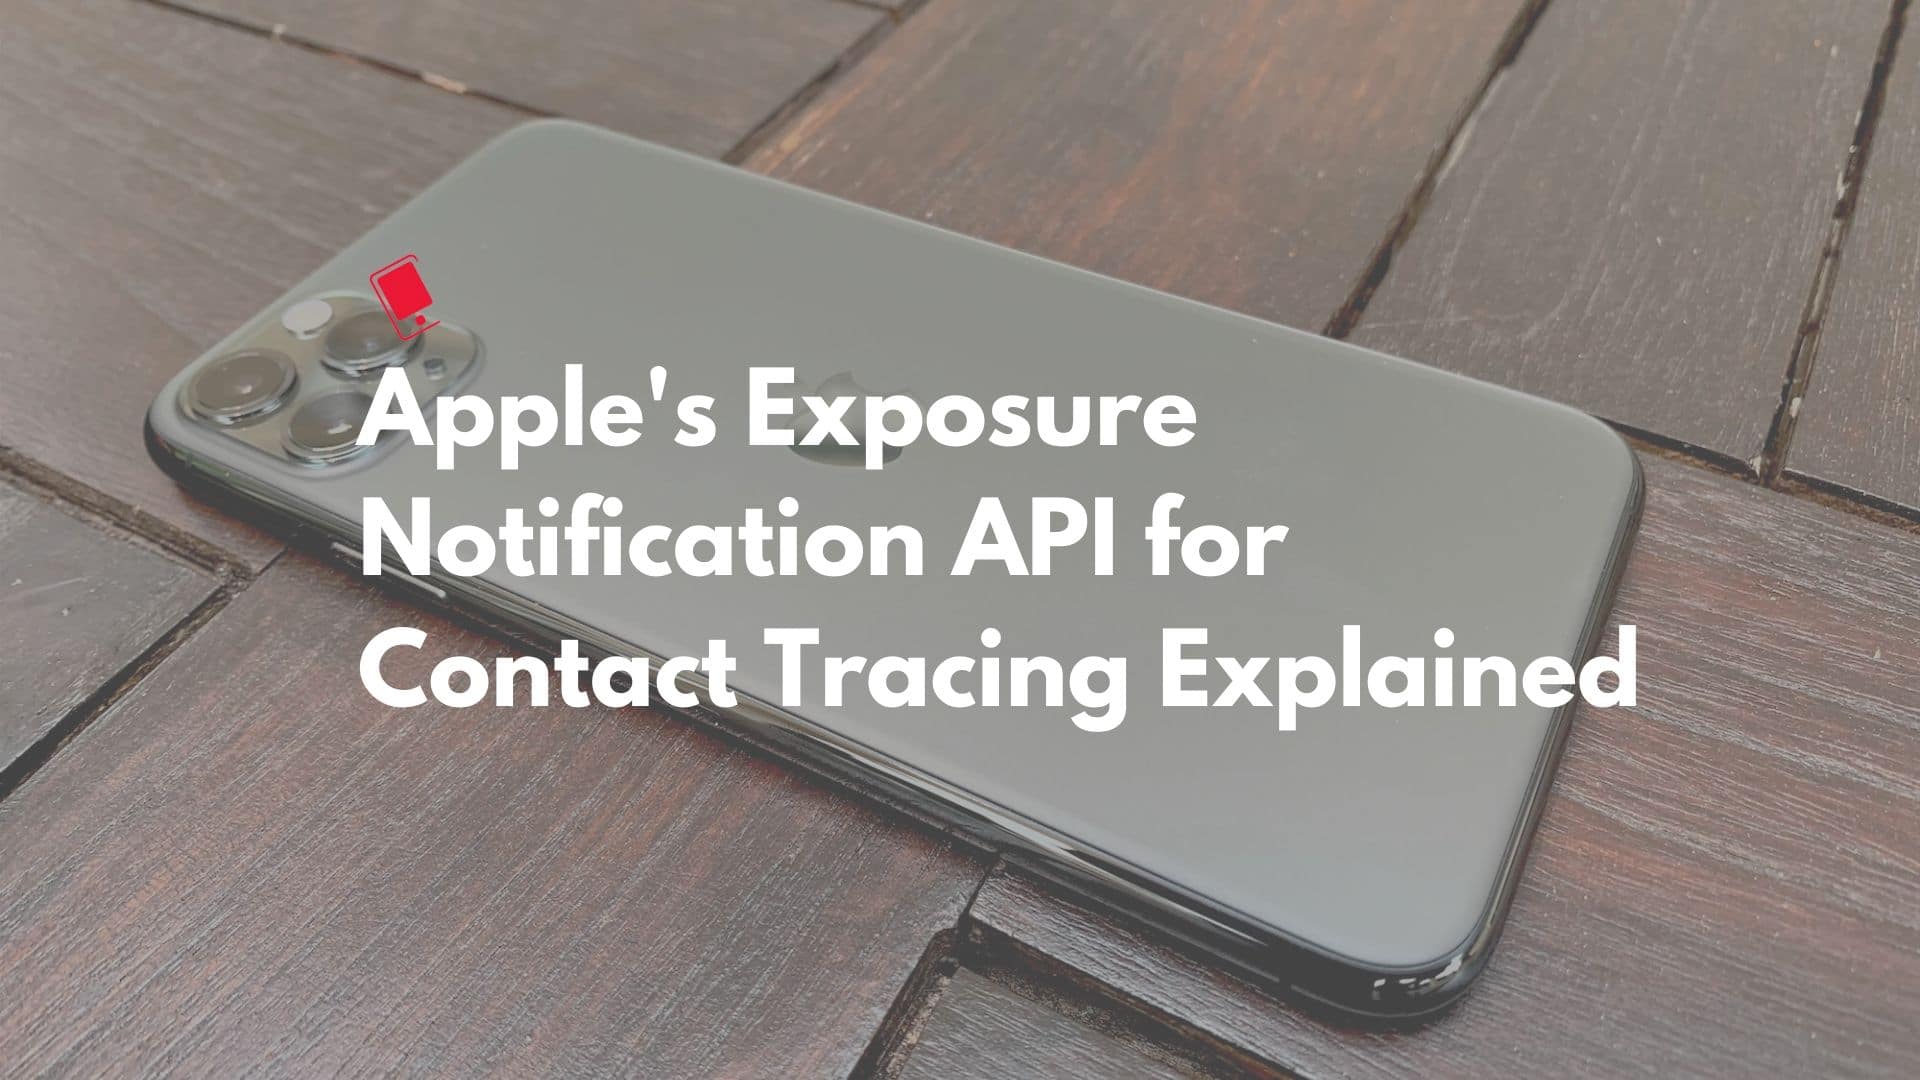 Apple Exposure Notification for Contact Tracing